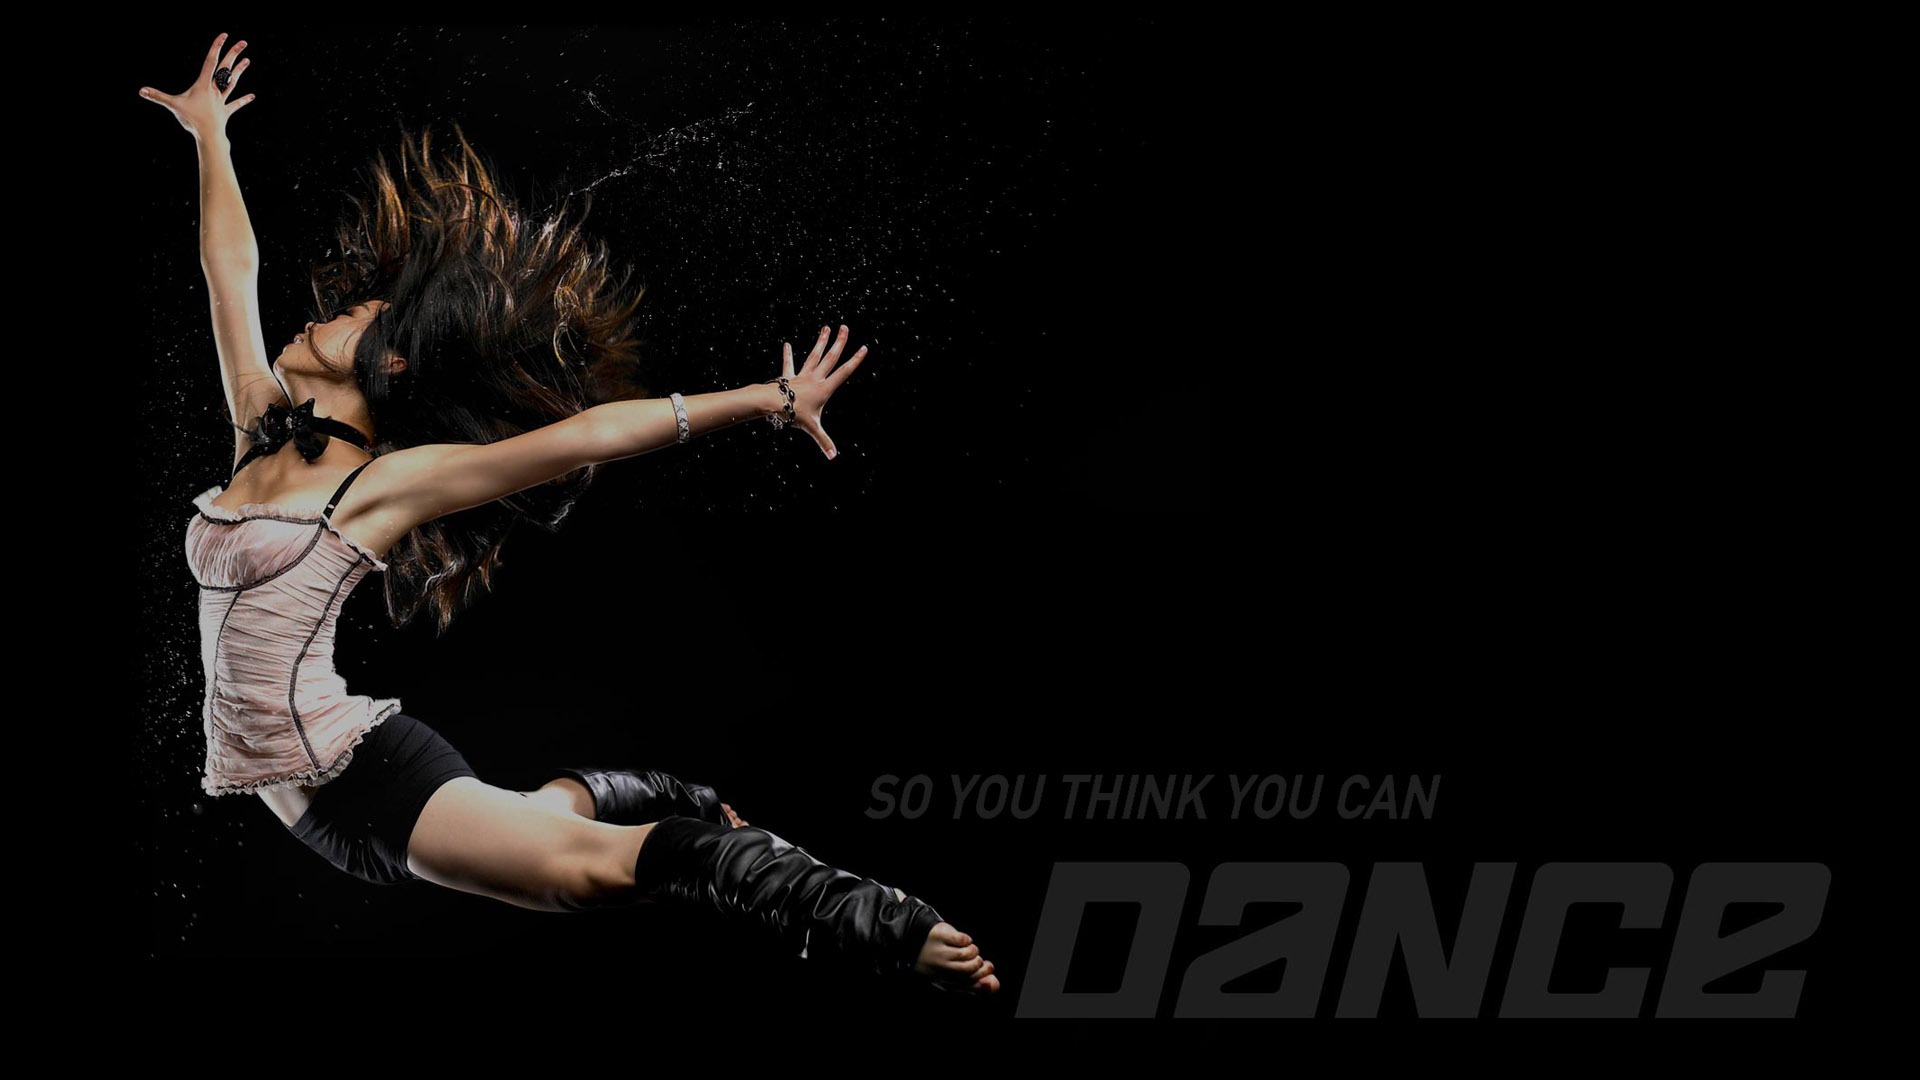 So You Think You Can Dance wallpaper (1) #1 - 1920x1080